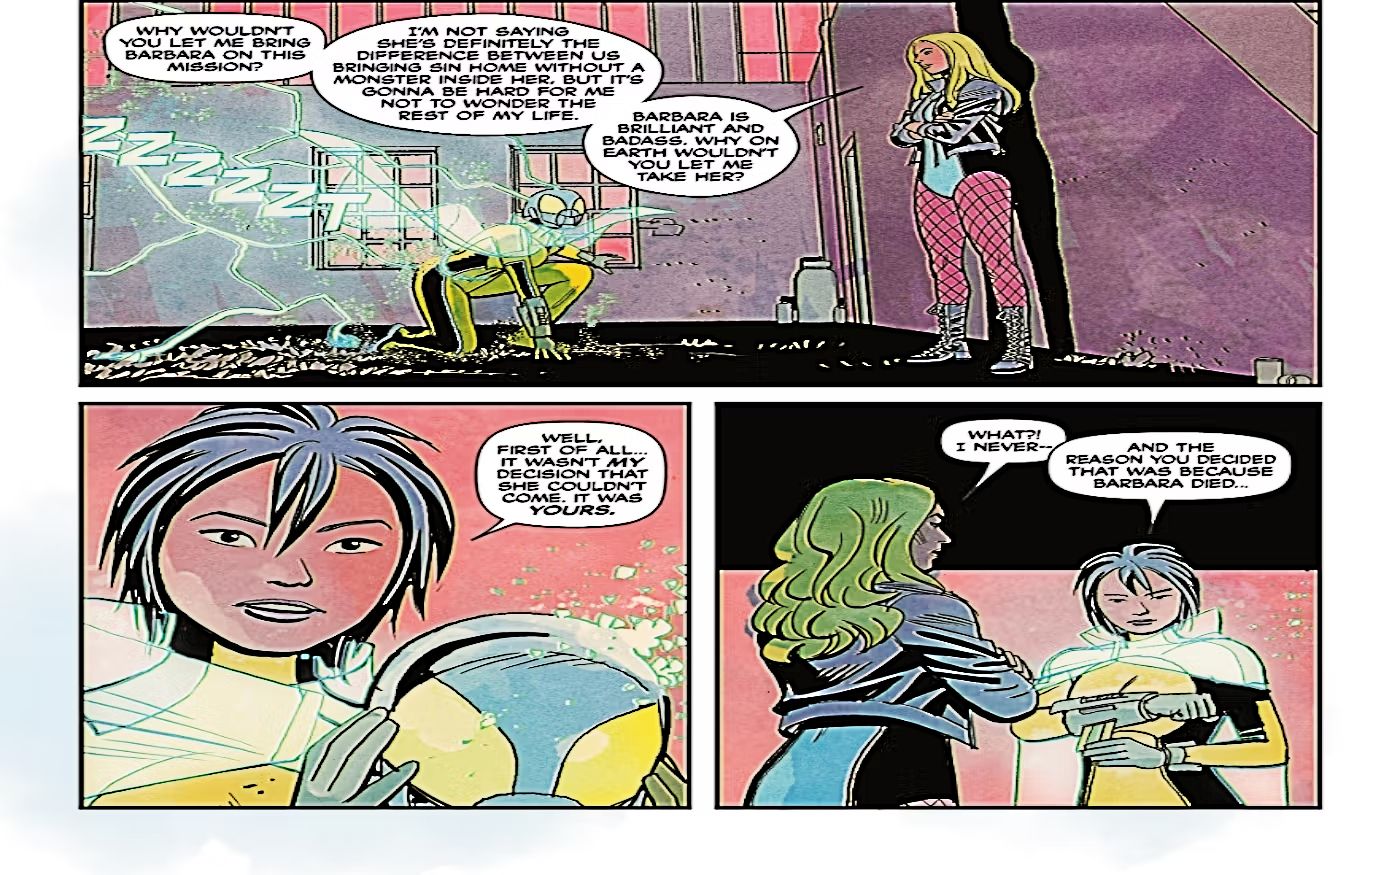 Birds of Prey #6, Maps and Black Canary discuss why Barbara Gordon wasn't on their previous mission